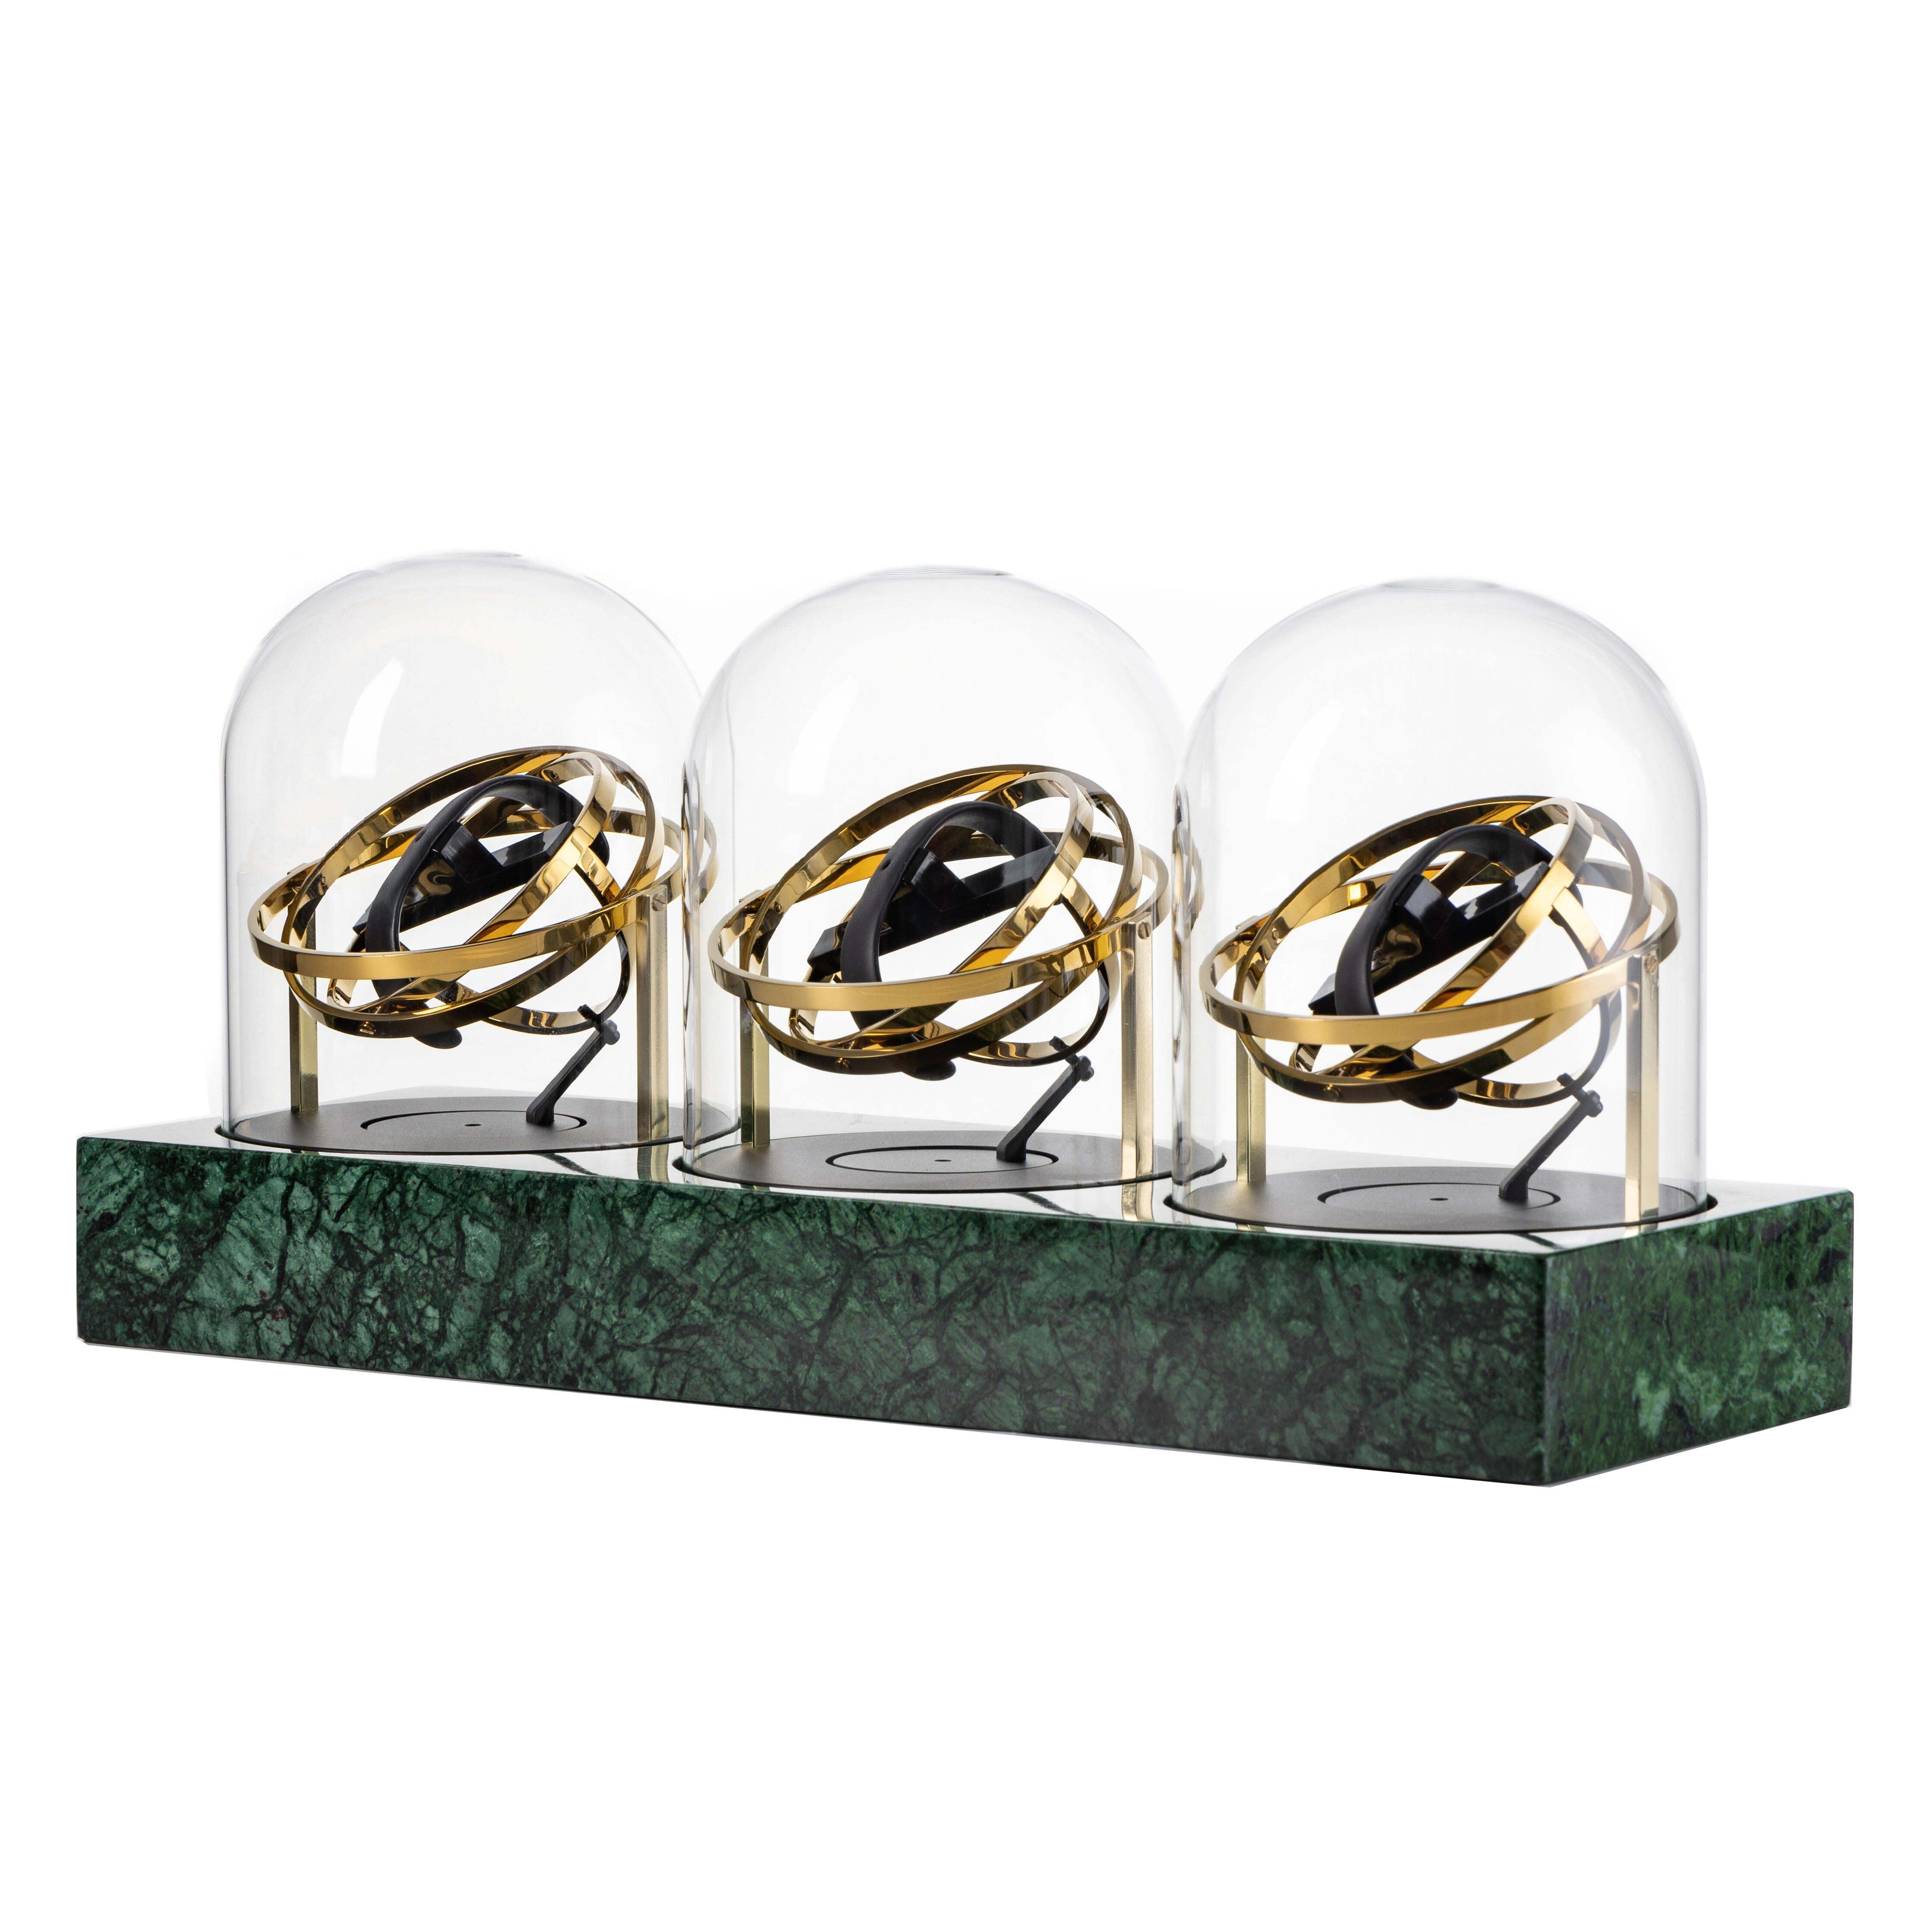 Triple Watch Winder - Astronomia X1 Gold - Green Marble Edition